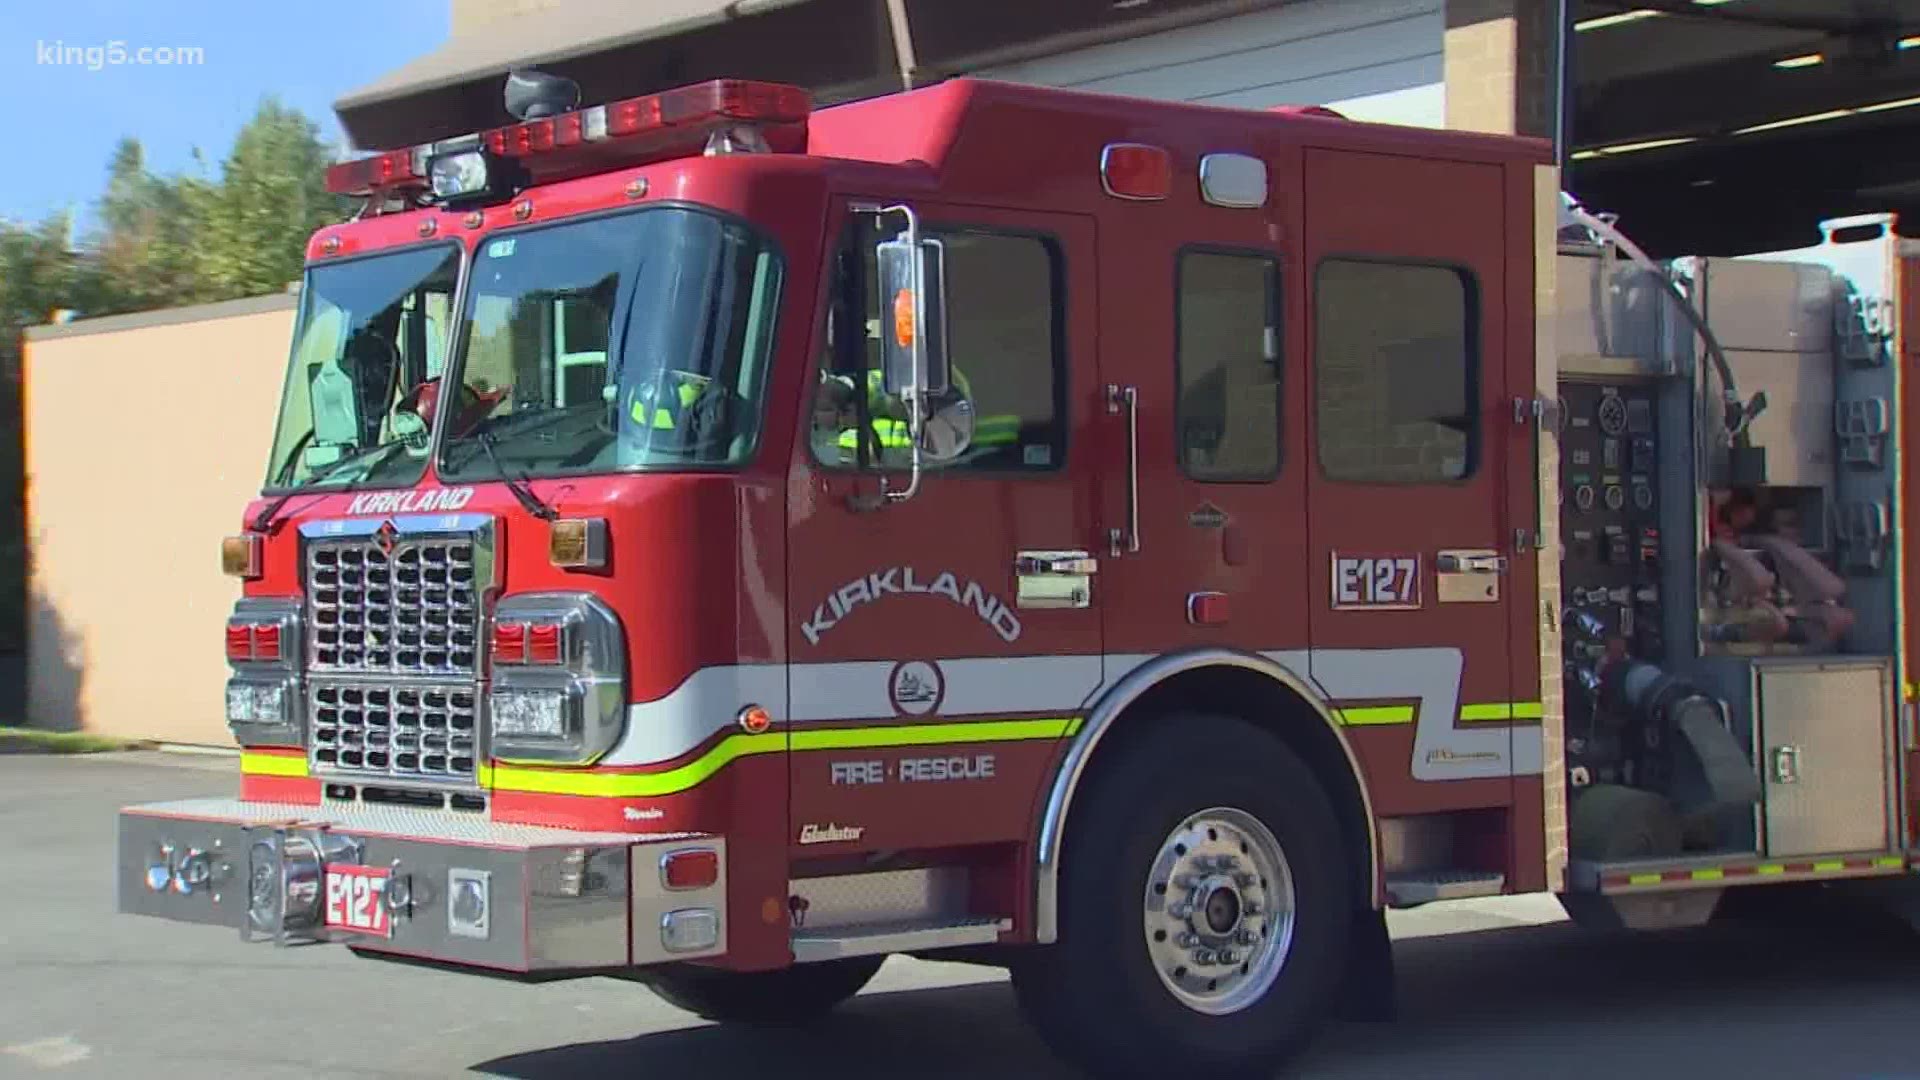 Proposition 1 asks voters to pay for more firefighters in the city of Kirkland as well as PPE for first responders.